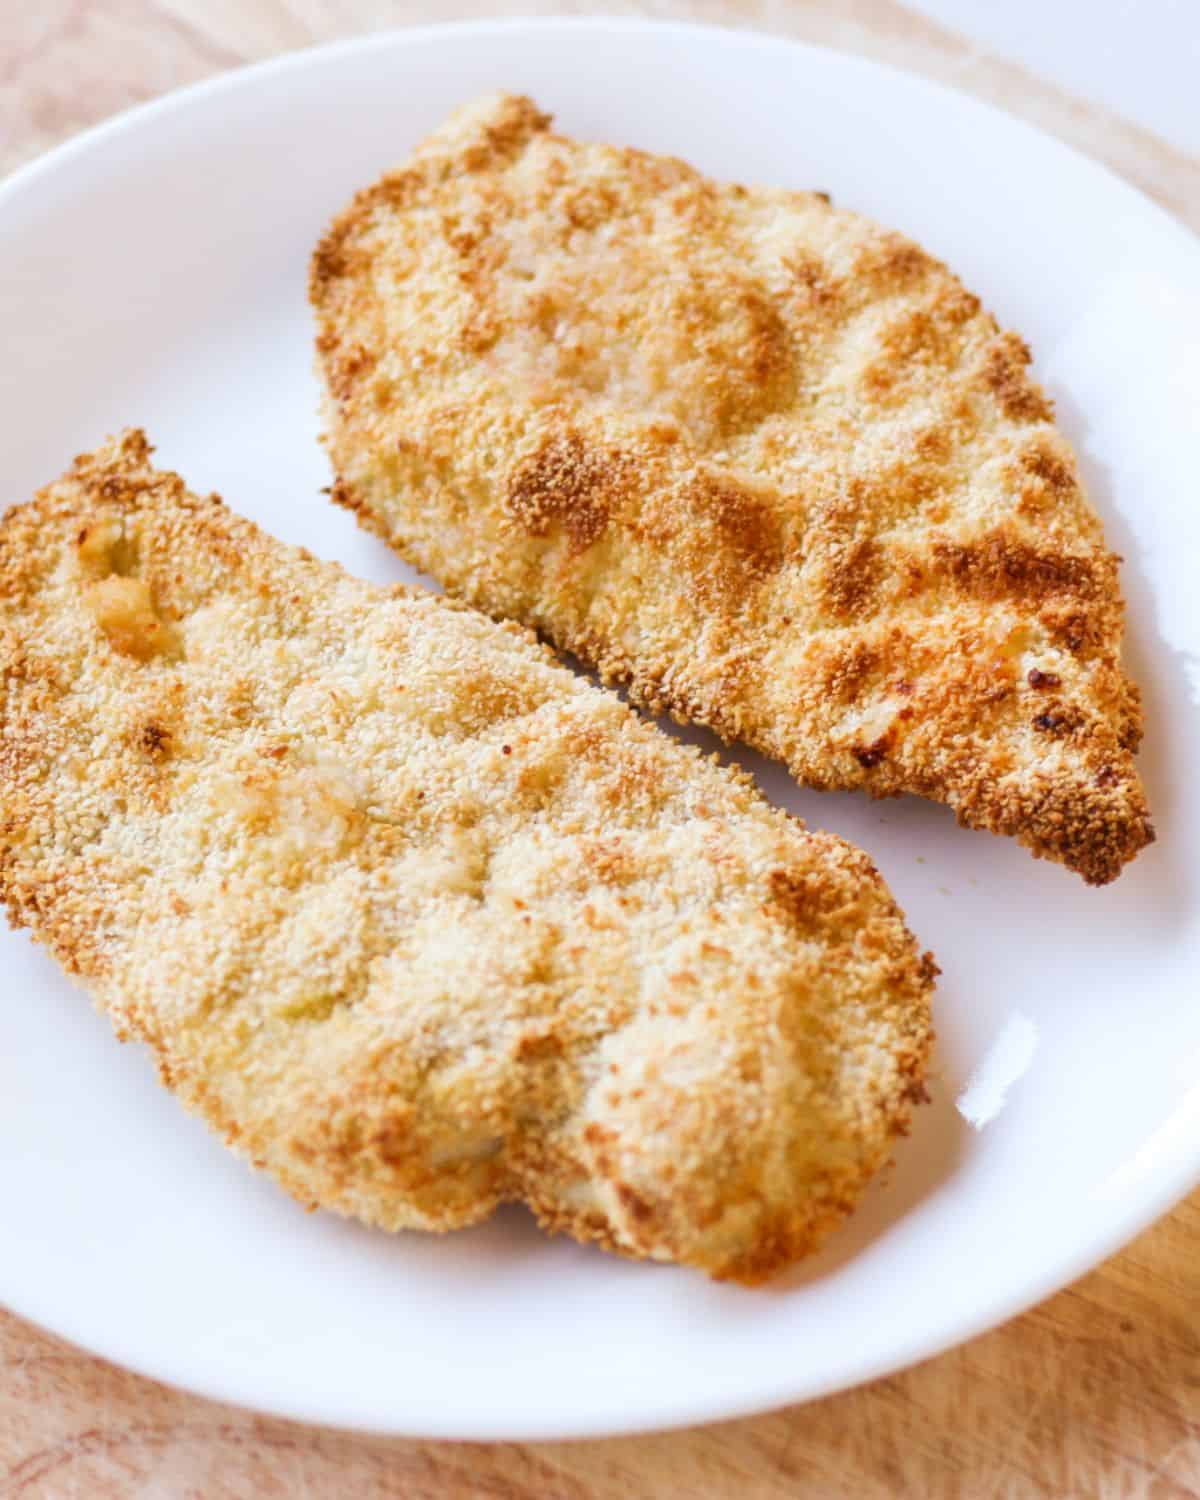 Two cooked breaded chicken cutlets on a white plate.